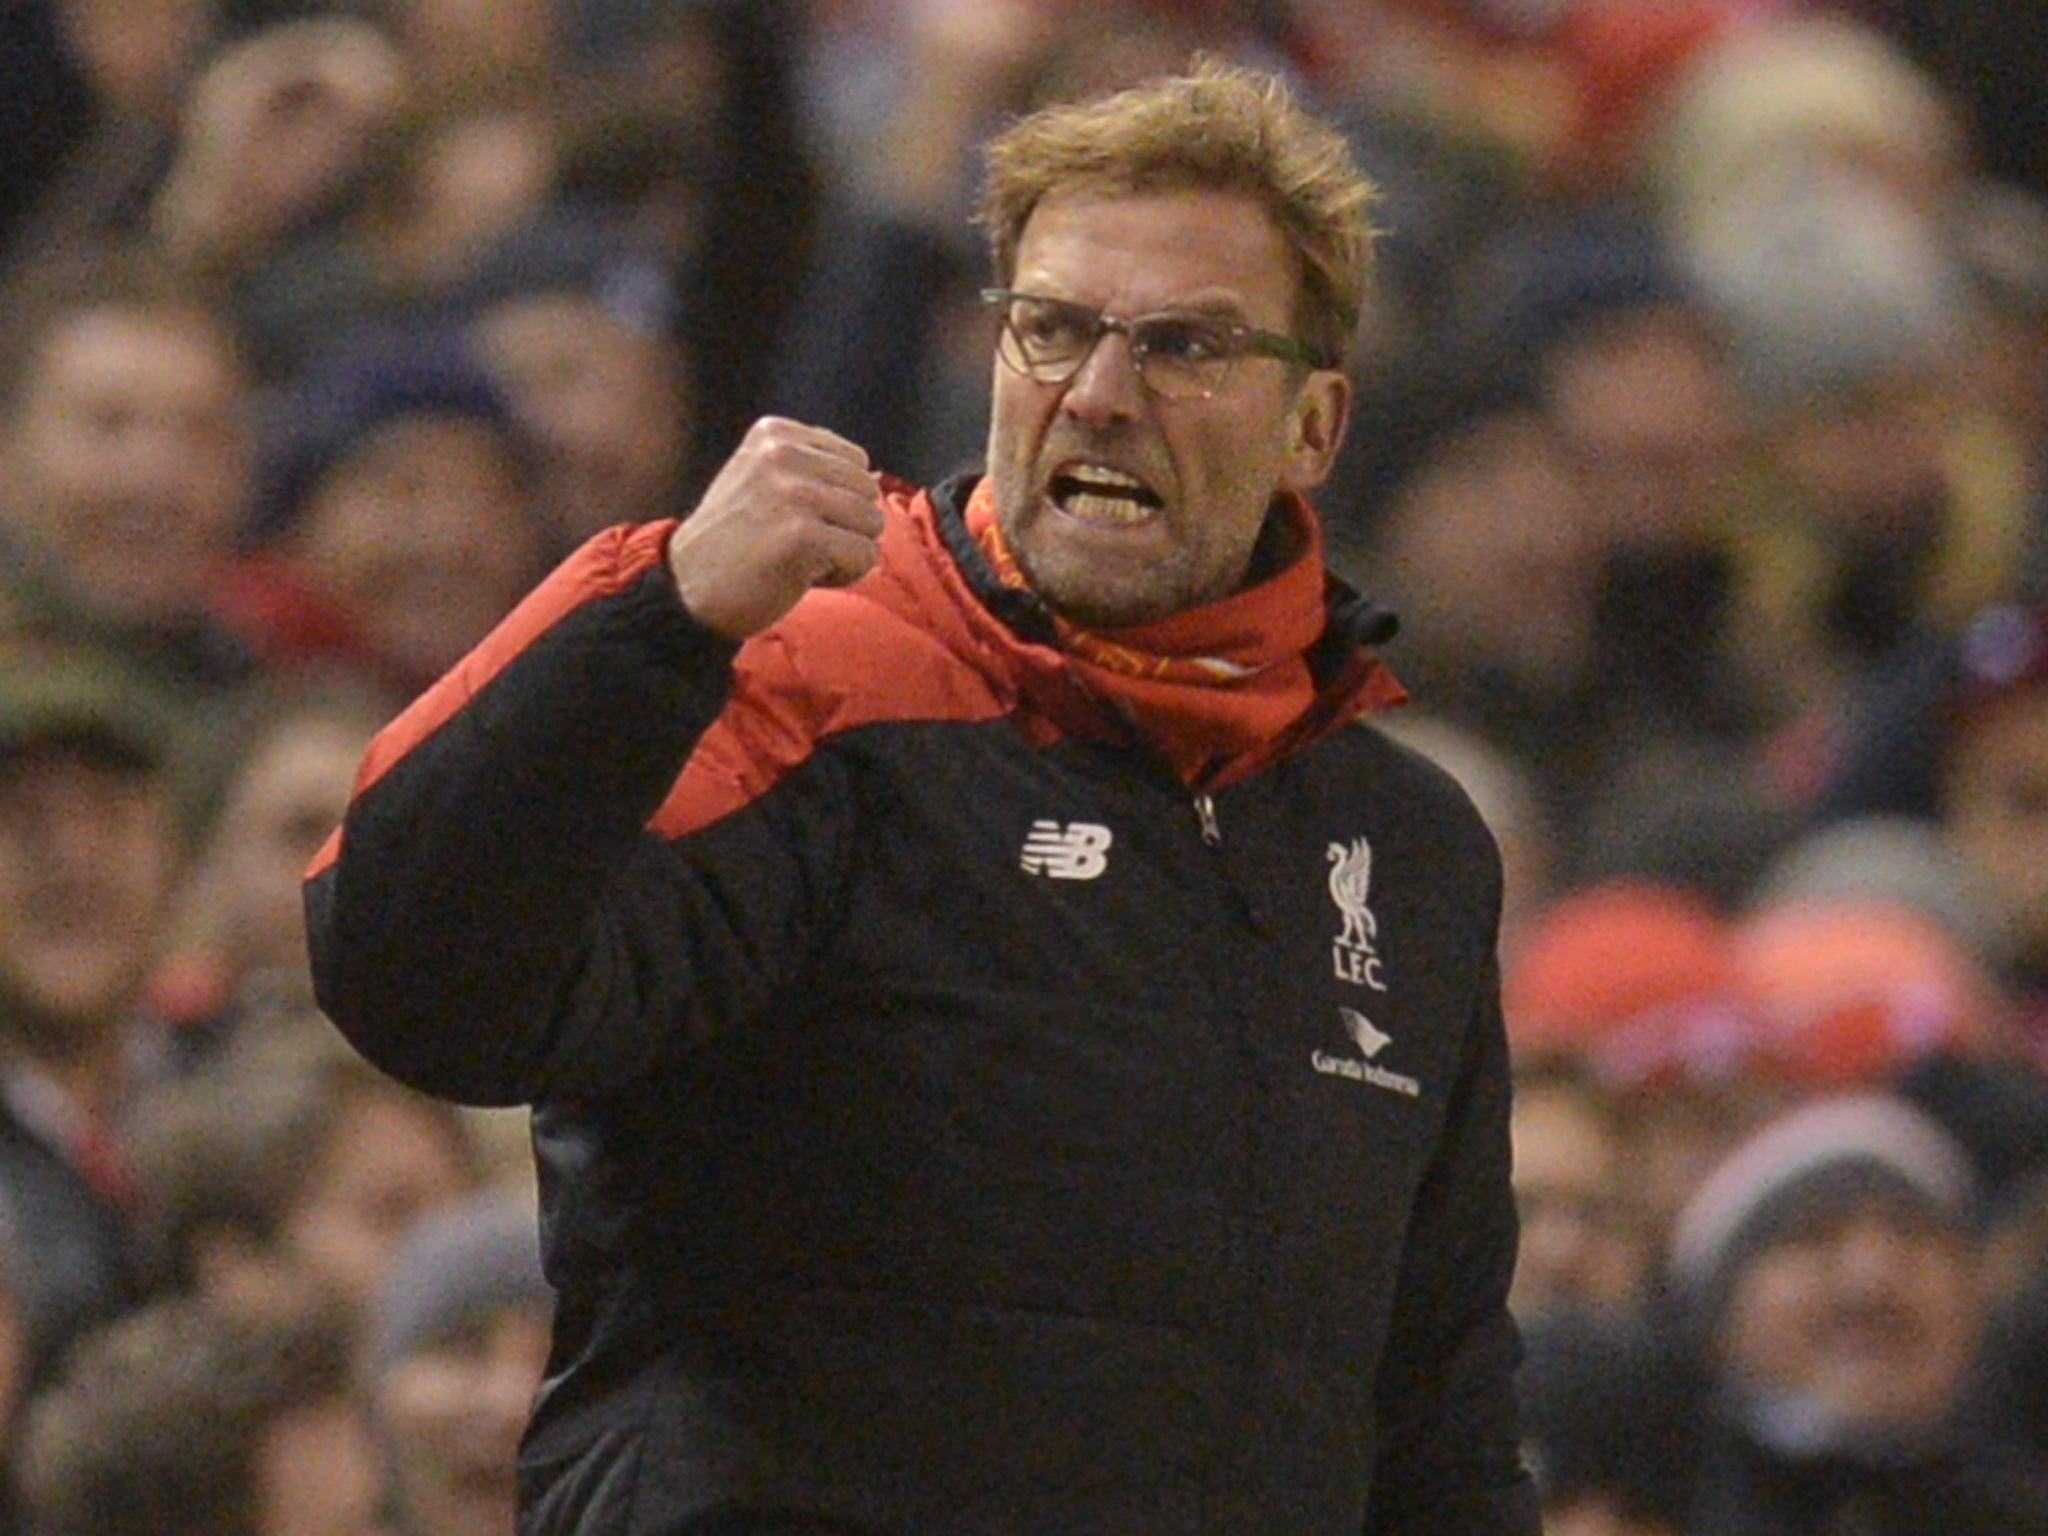 Jurgen Klopp celebrates Liverpool's late equaliser against West Brom in the 2-2 draw last Sunday